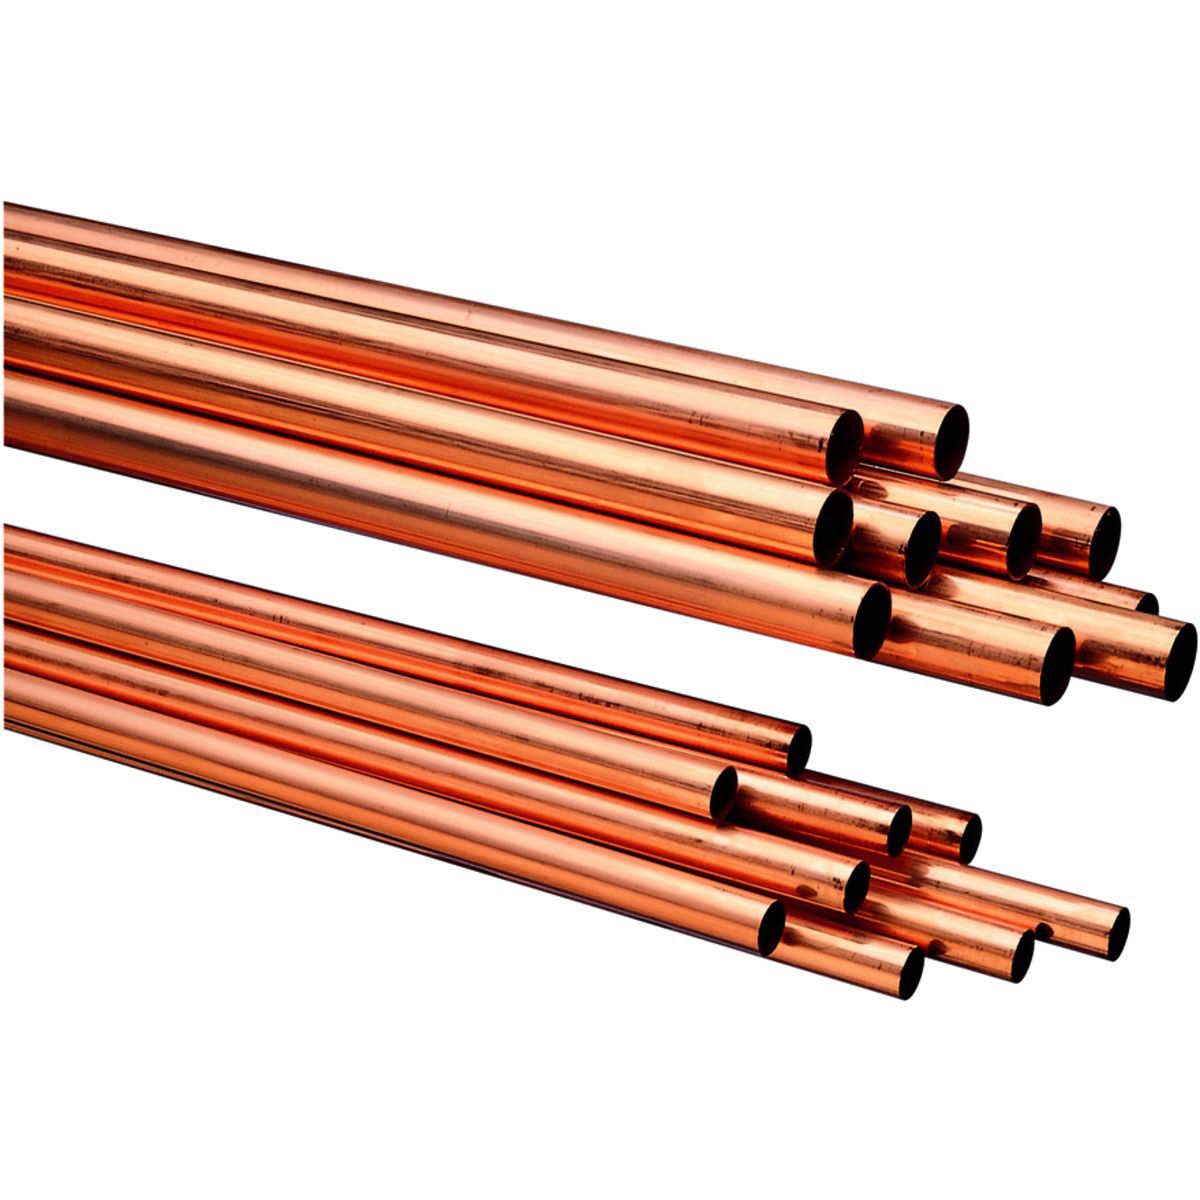 Image of Wednesbury Copper Pipe 15mm x 3m Pack 10